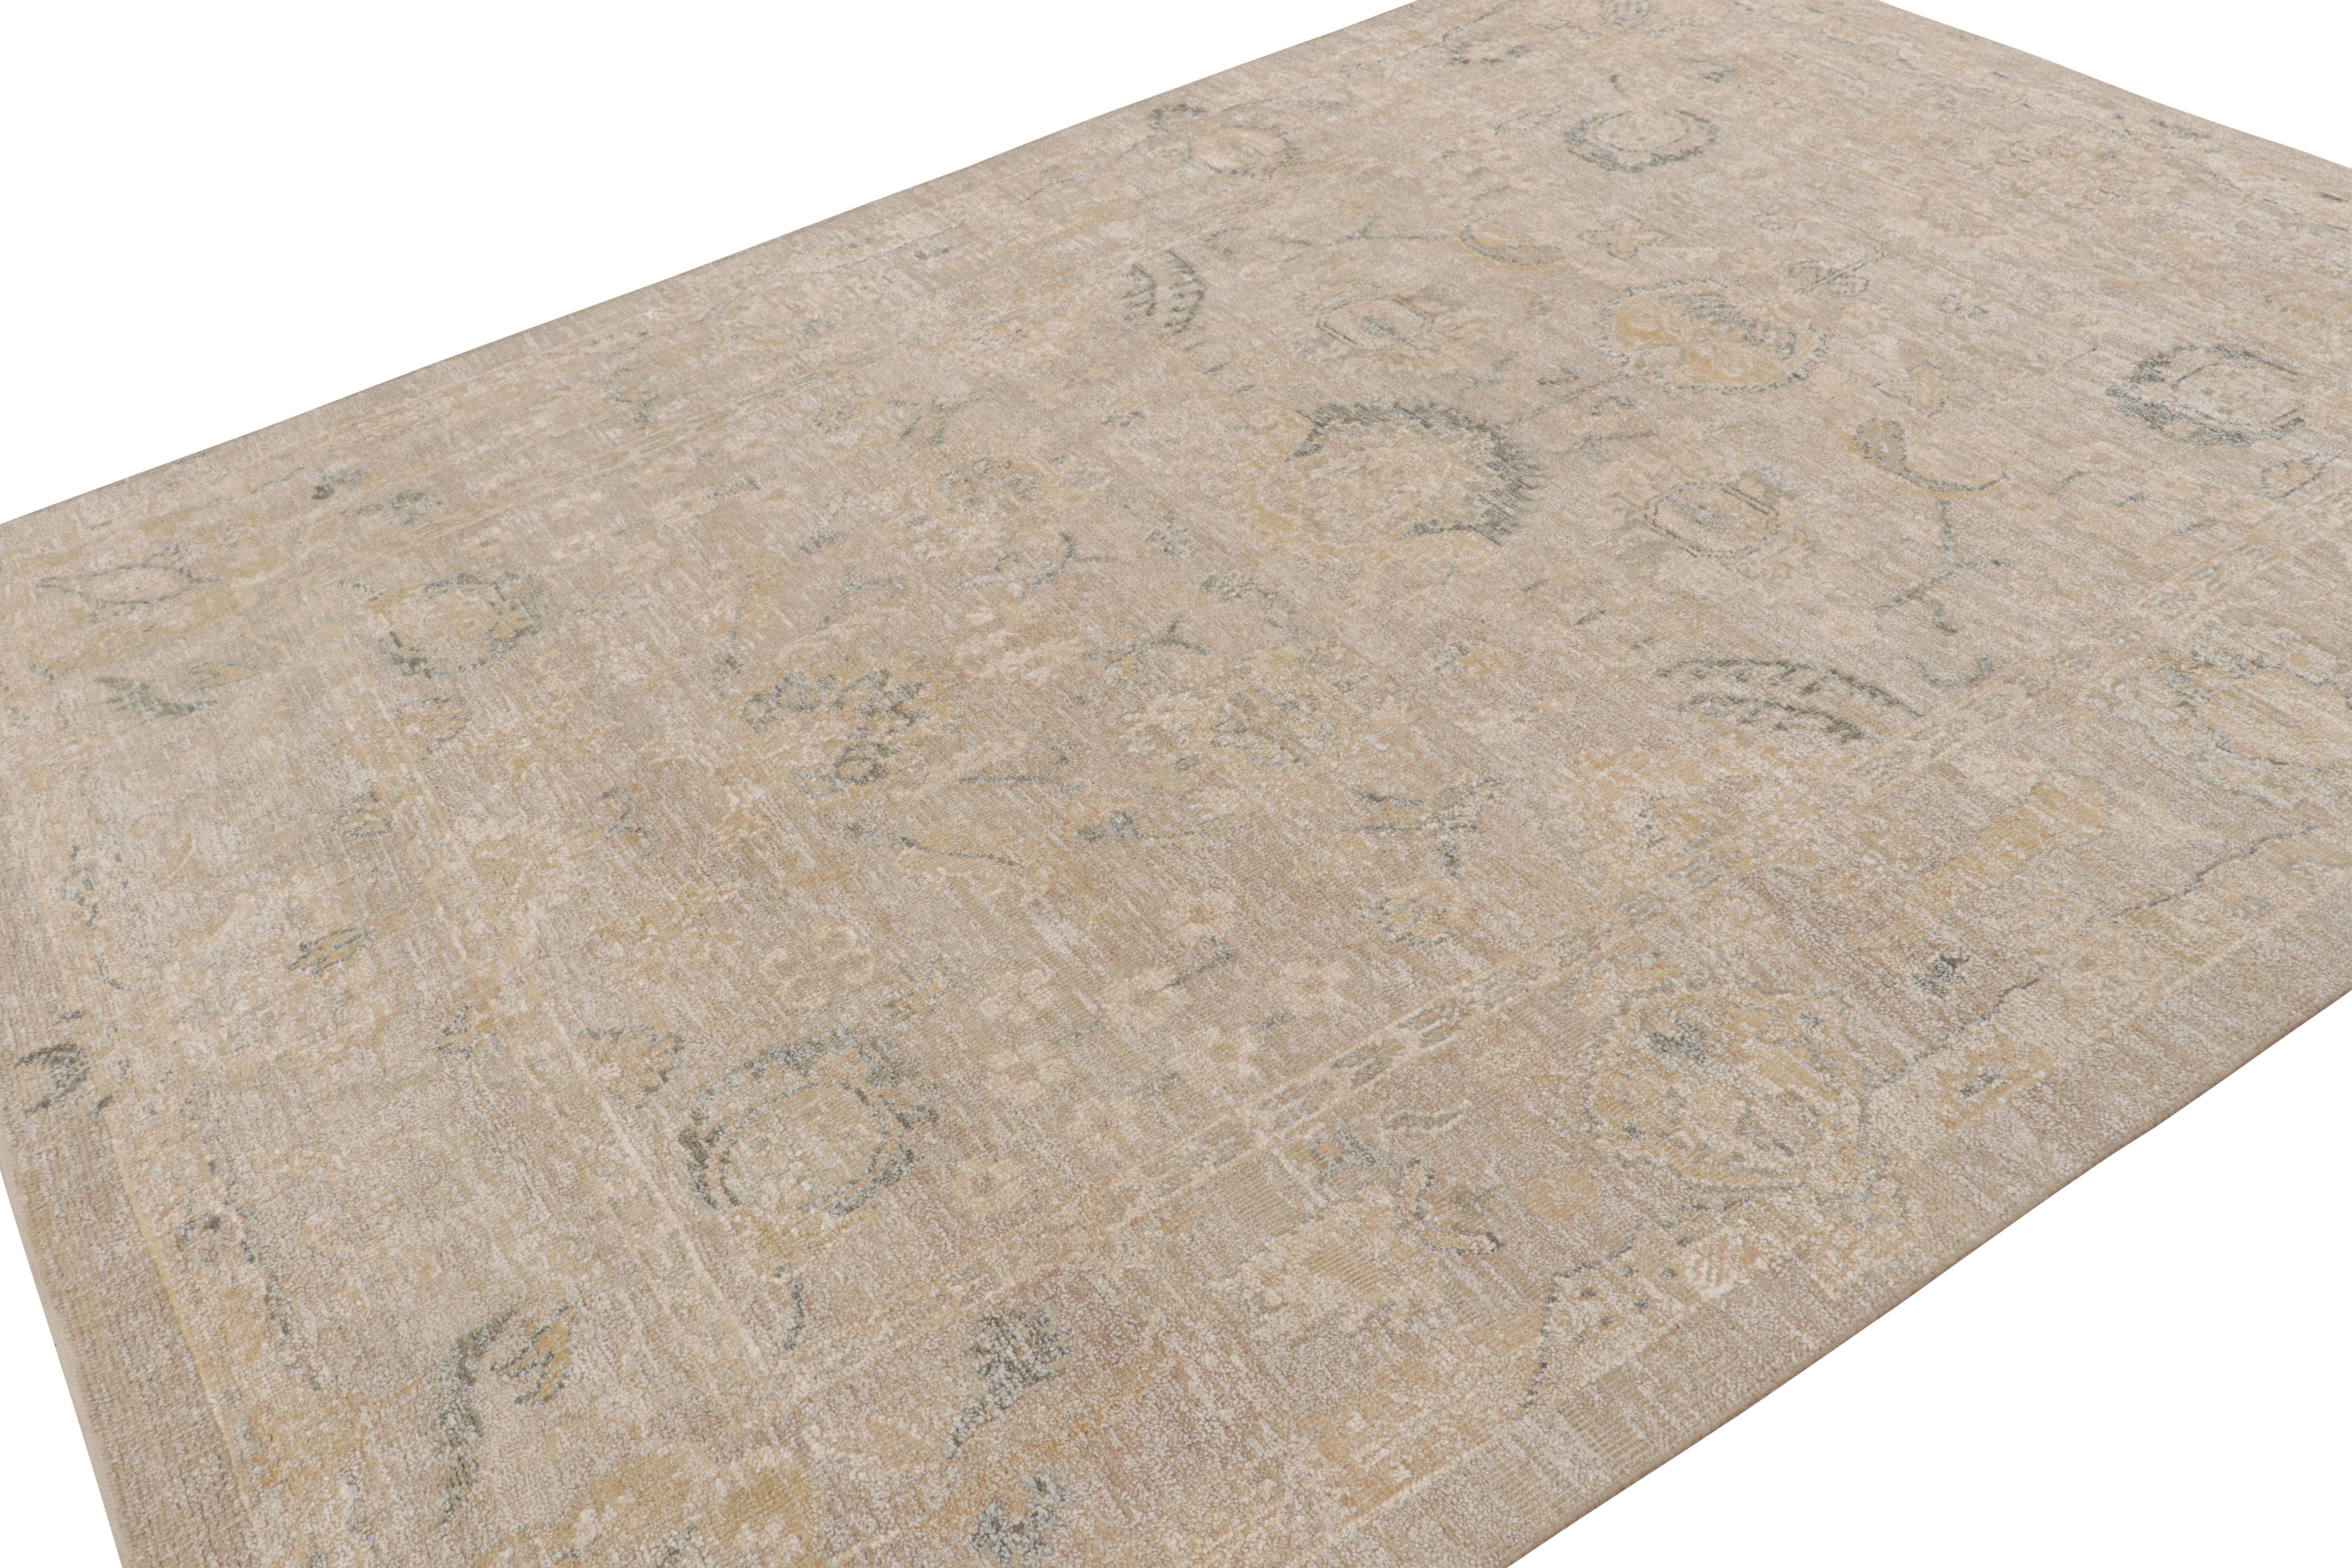 Hand-knotted in wool & silk, this 8x10 rug from Rug & Kilim’s Modern Classics is inspired by vintage and antique Oushak rugs.  

On the design: 

In this piece, beige-brown tones underscore muted floral patterns with slate gray and ivory accents.